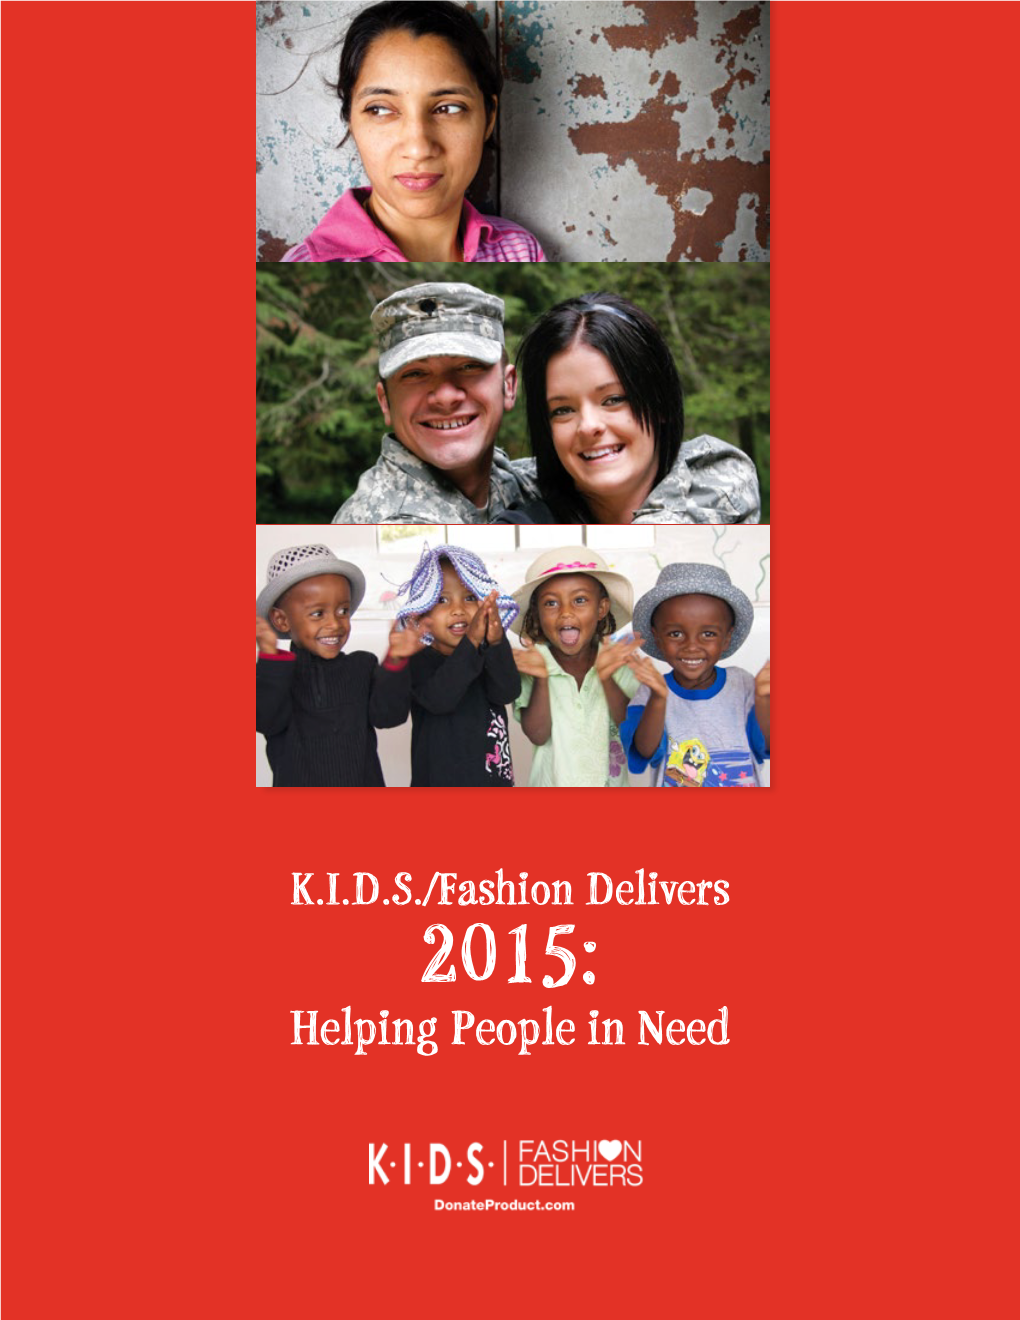 Delivering Good 2015 Annual Report